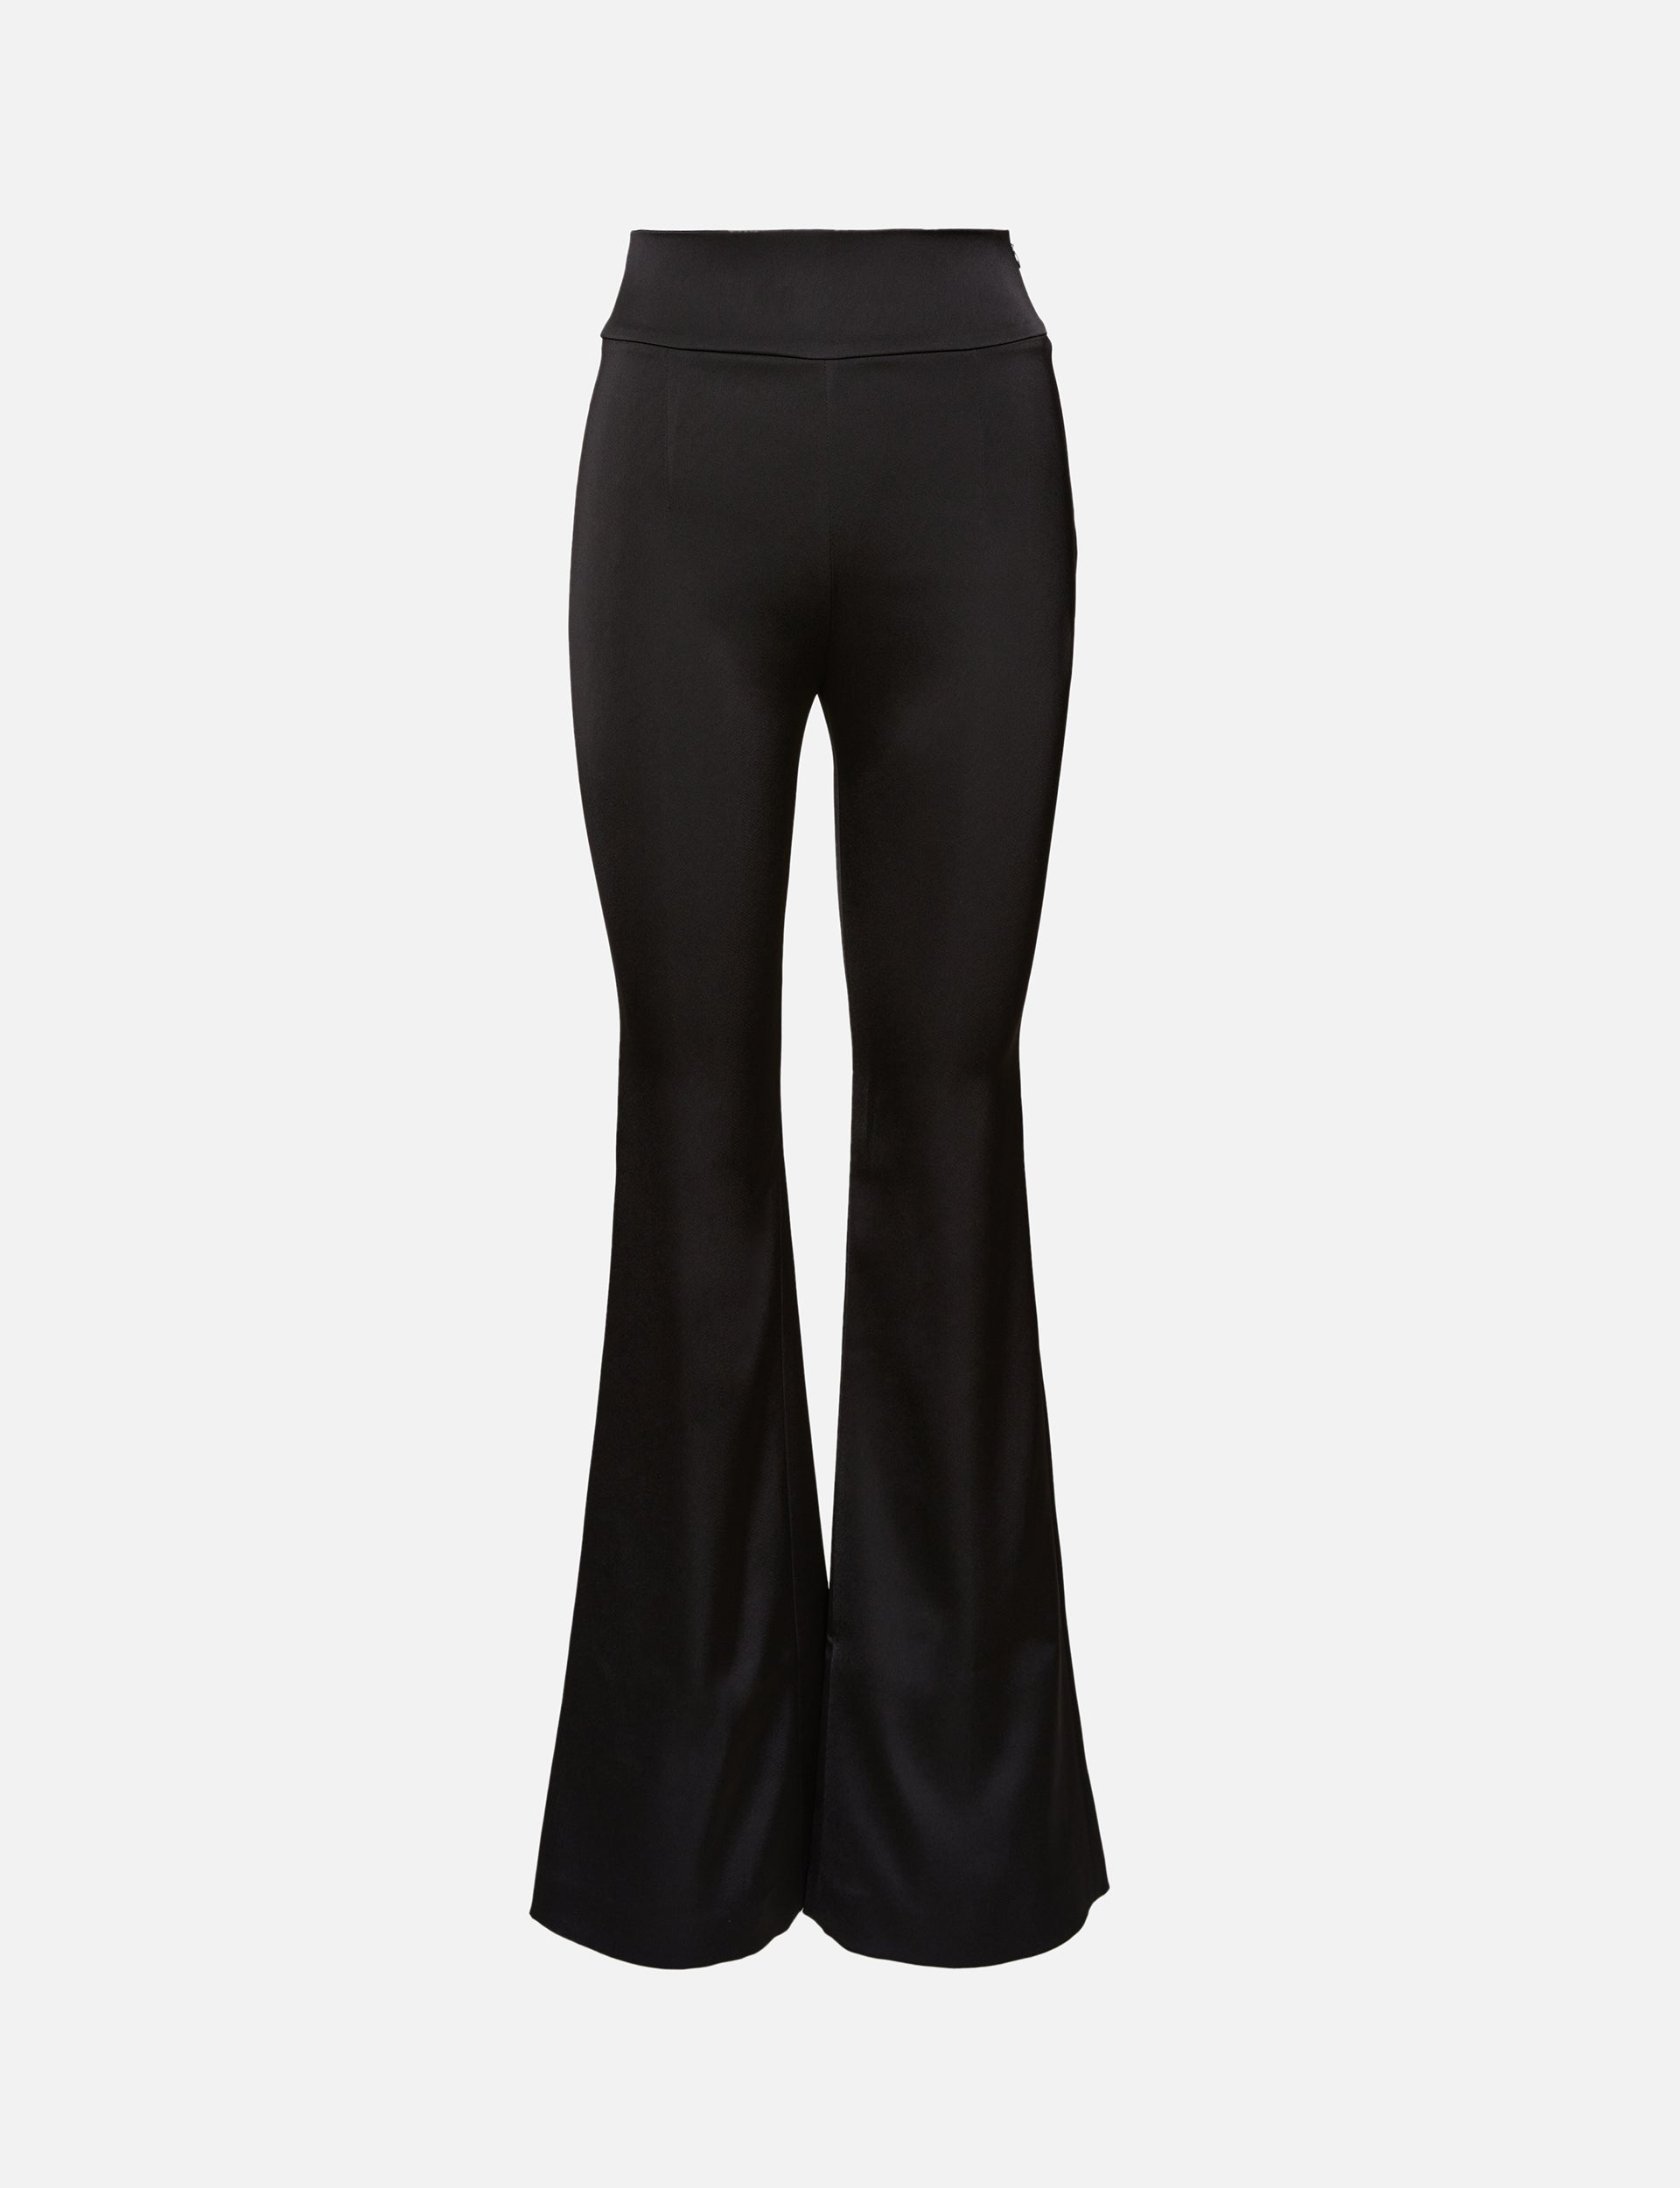 Designer Tailored Pants for Women | Fashion pants, Fashion, See by chloe